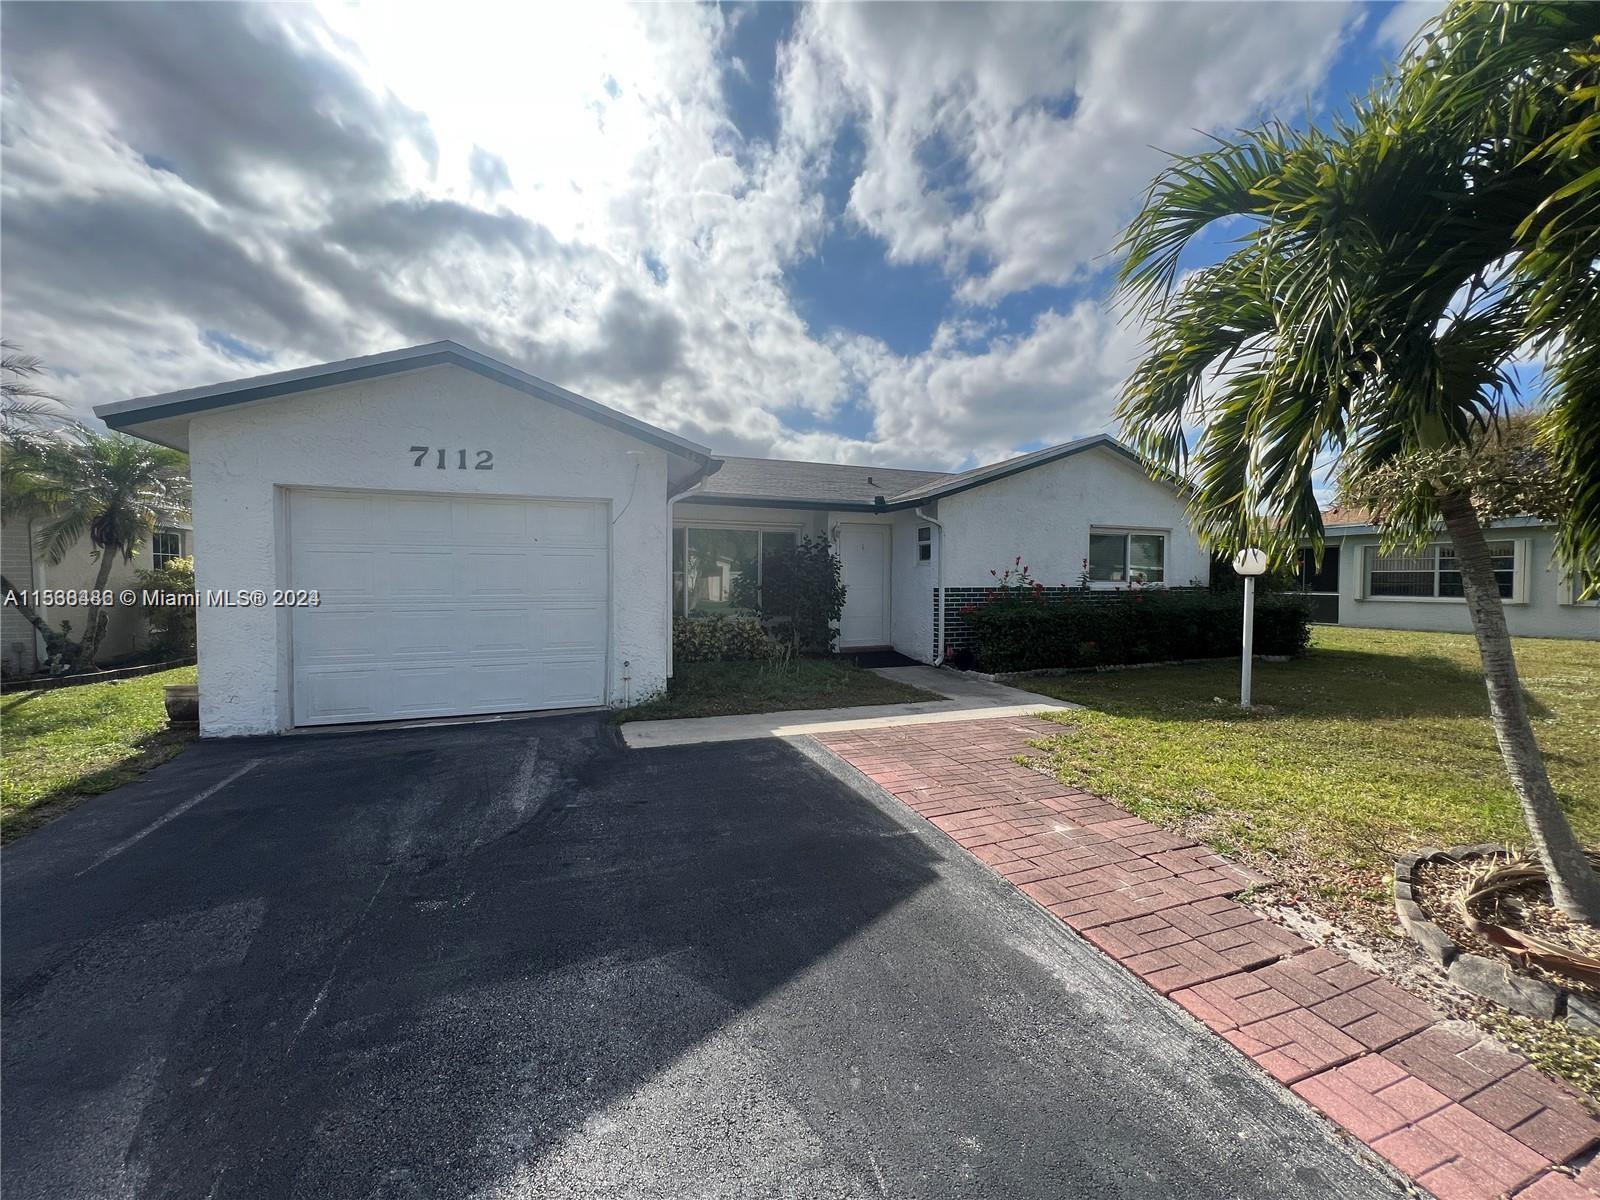 Photo of 7112 Pine Manor Dr in Lake Worth, FL